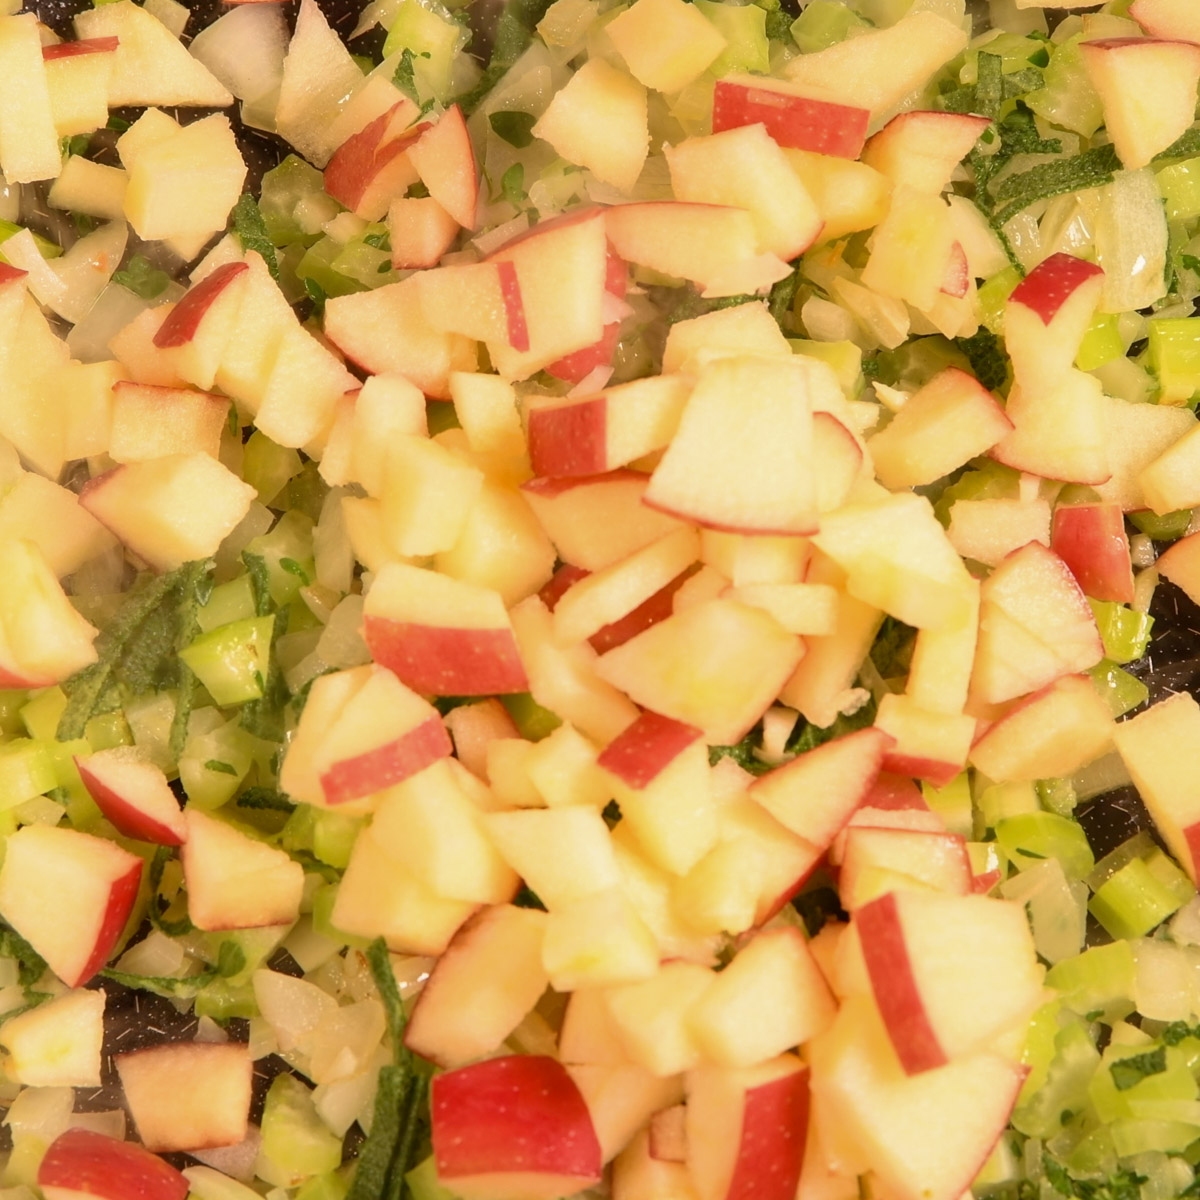 Add apples to the vegetables.